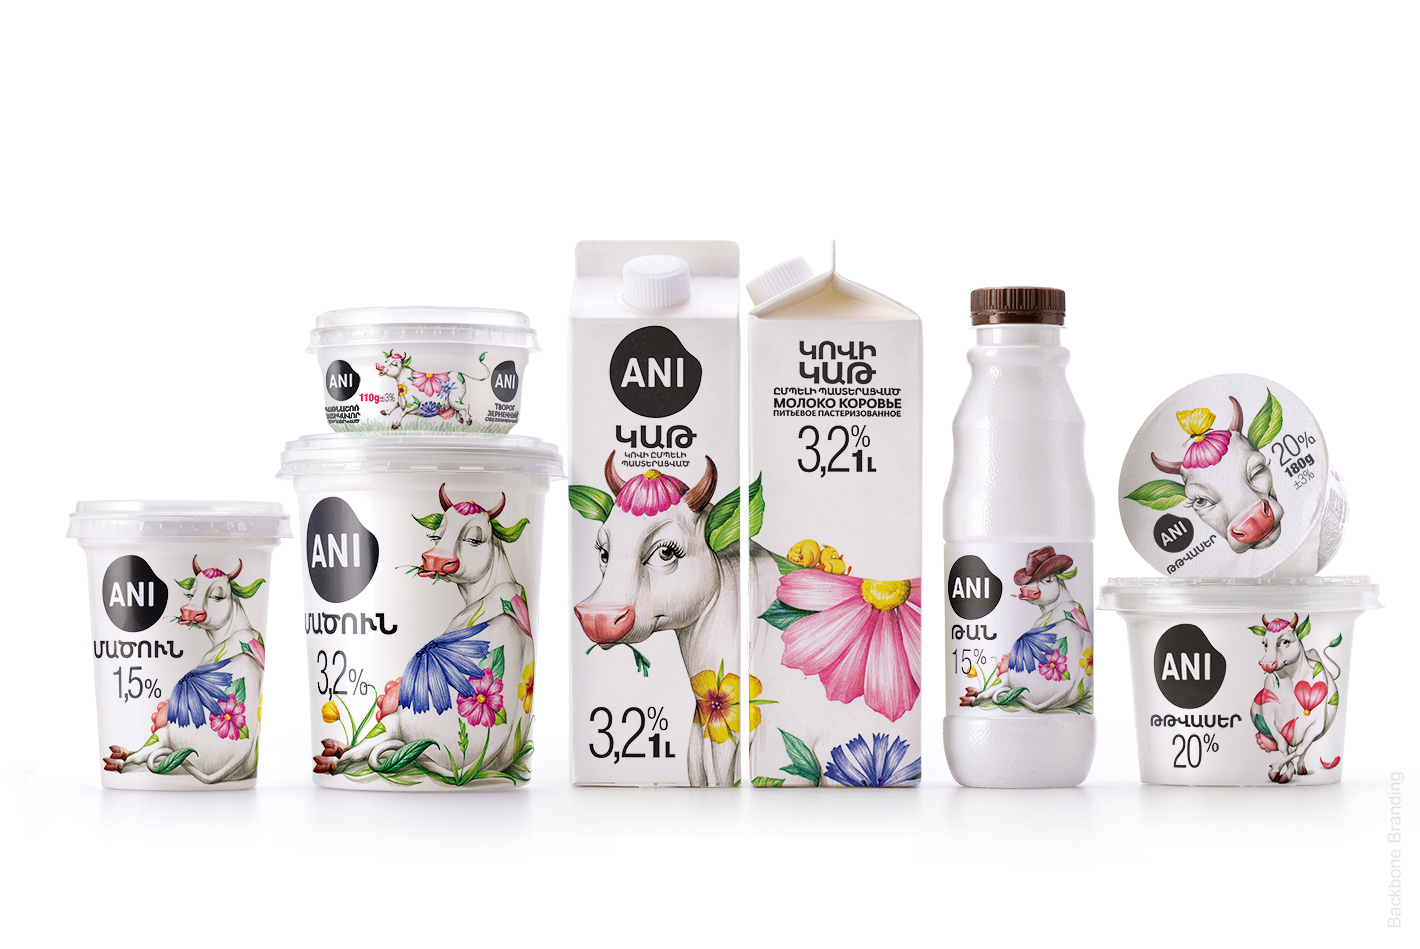 The Rebranding of a Dairy Product Line